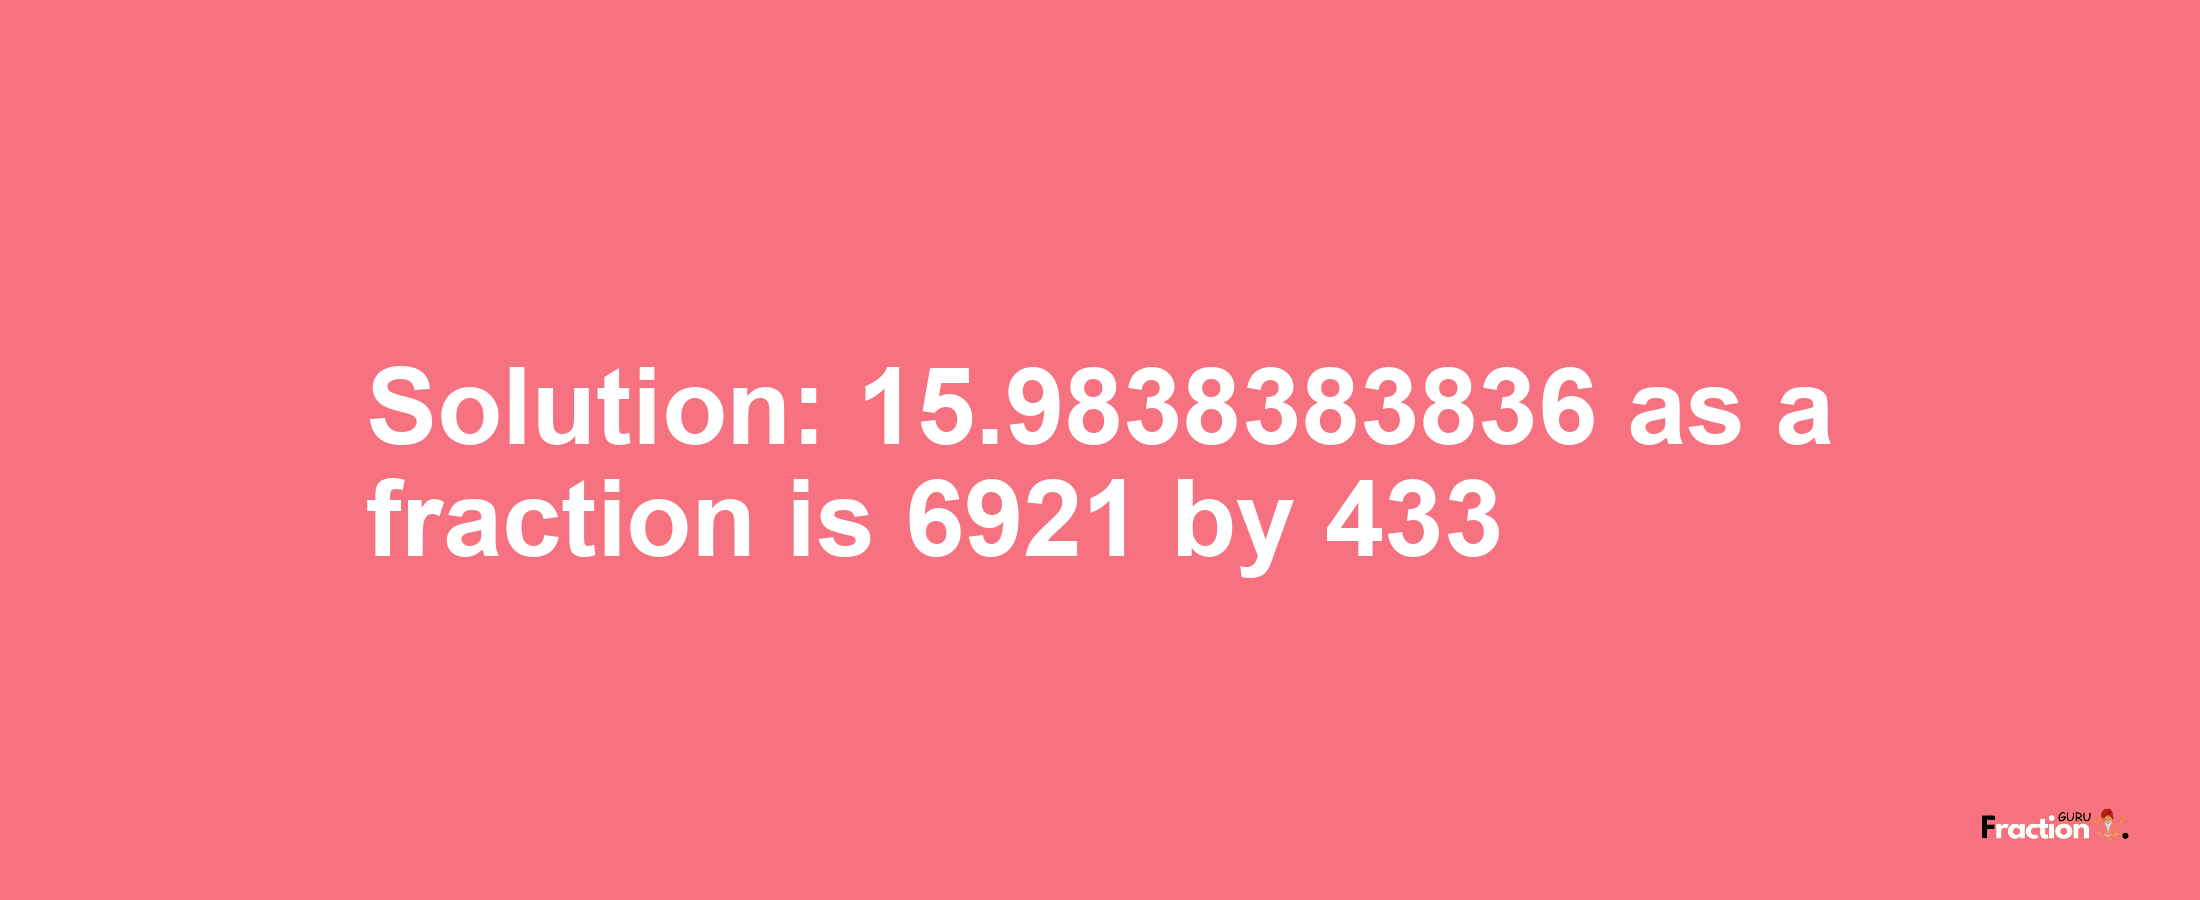 Solution:15.9838383836 as a fraction is 6921/433